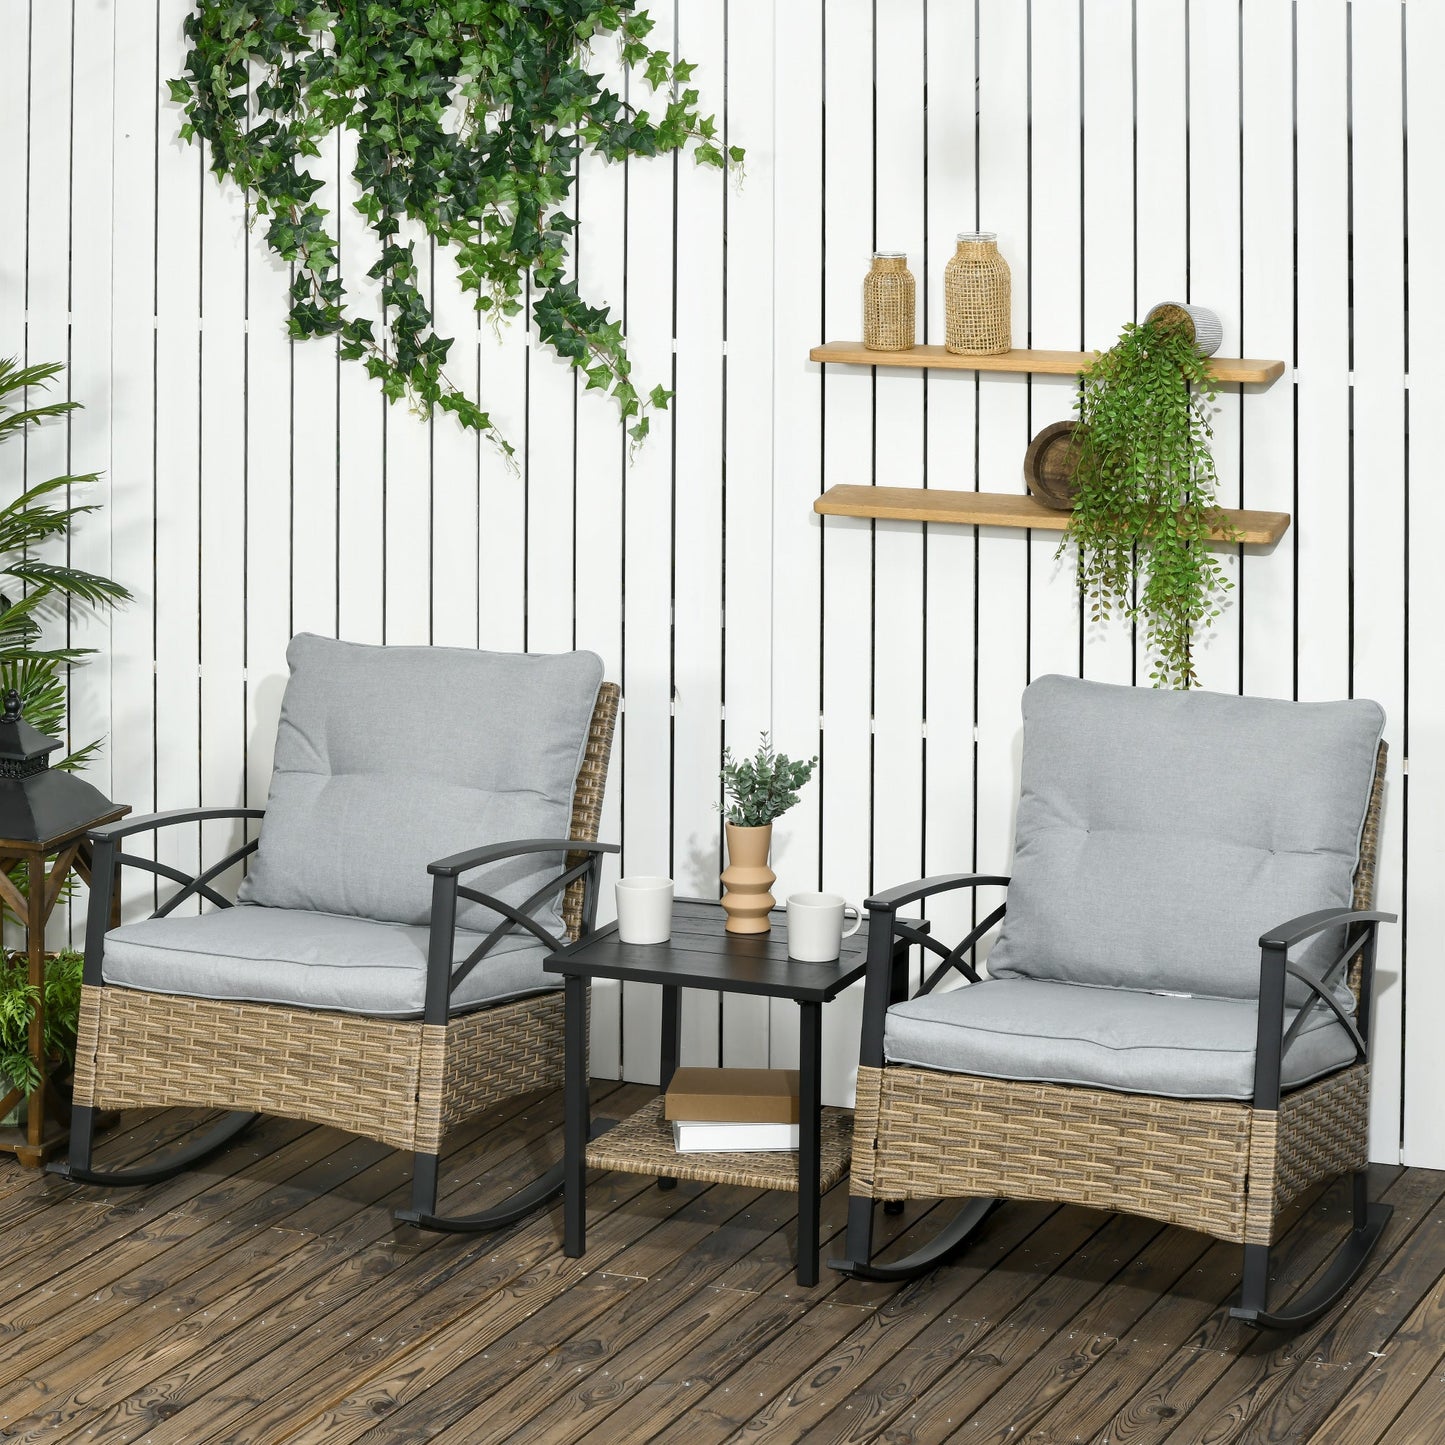 -Outsunny 3 Piece Rocking Wicker Bistro Set, Outdoor Patio Furniture Set with 2 Rocker Chairs, Cushions & Coffee Table for Garden, Backyard, Light Grey - Outdoor Style Company